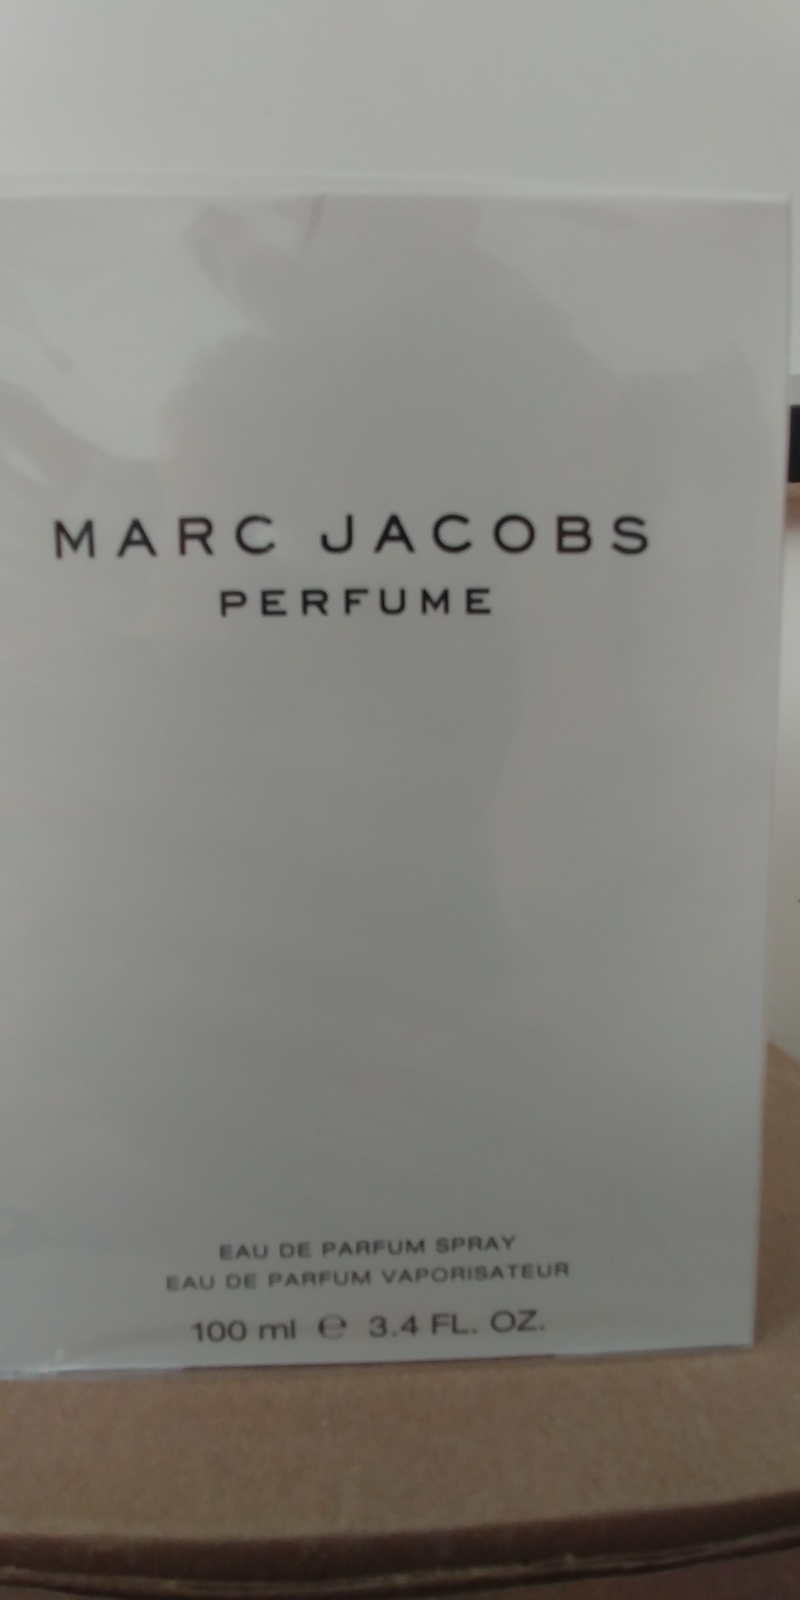 Primary image for MARC JACOBS BY MARC JACOBS 3.4 OZ EAU DE PERFUM SPRAY FOR WOMEN